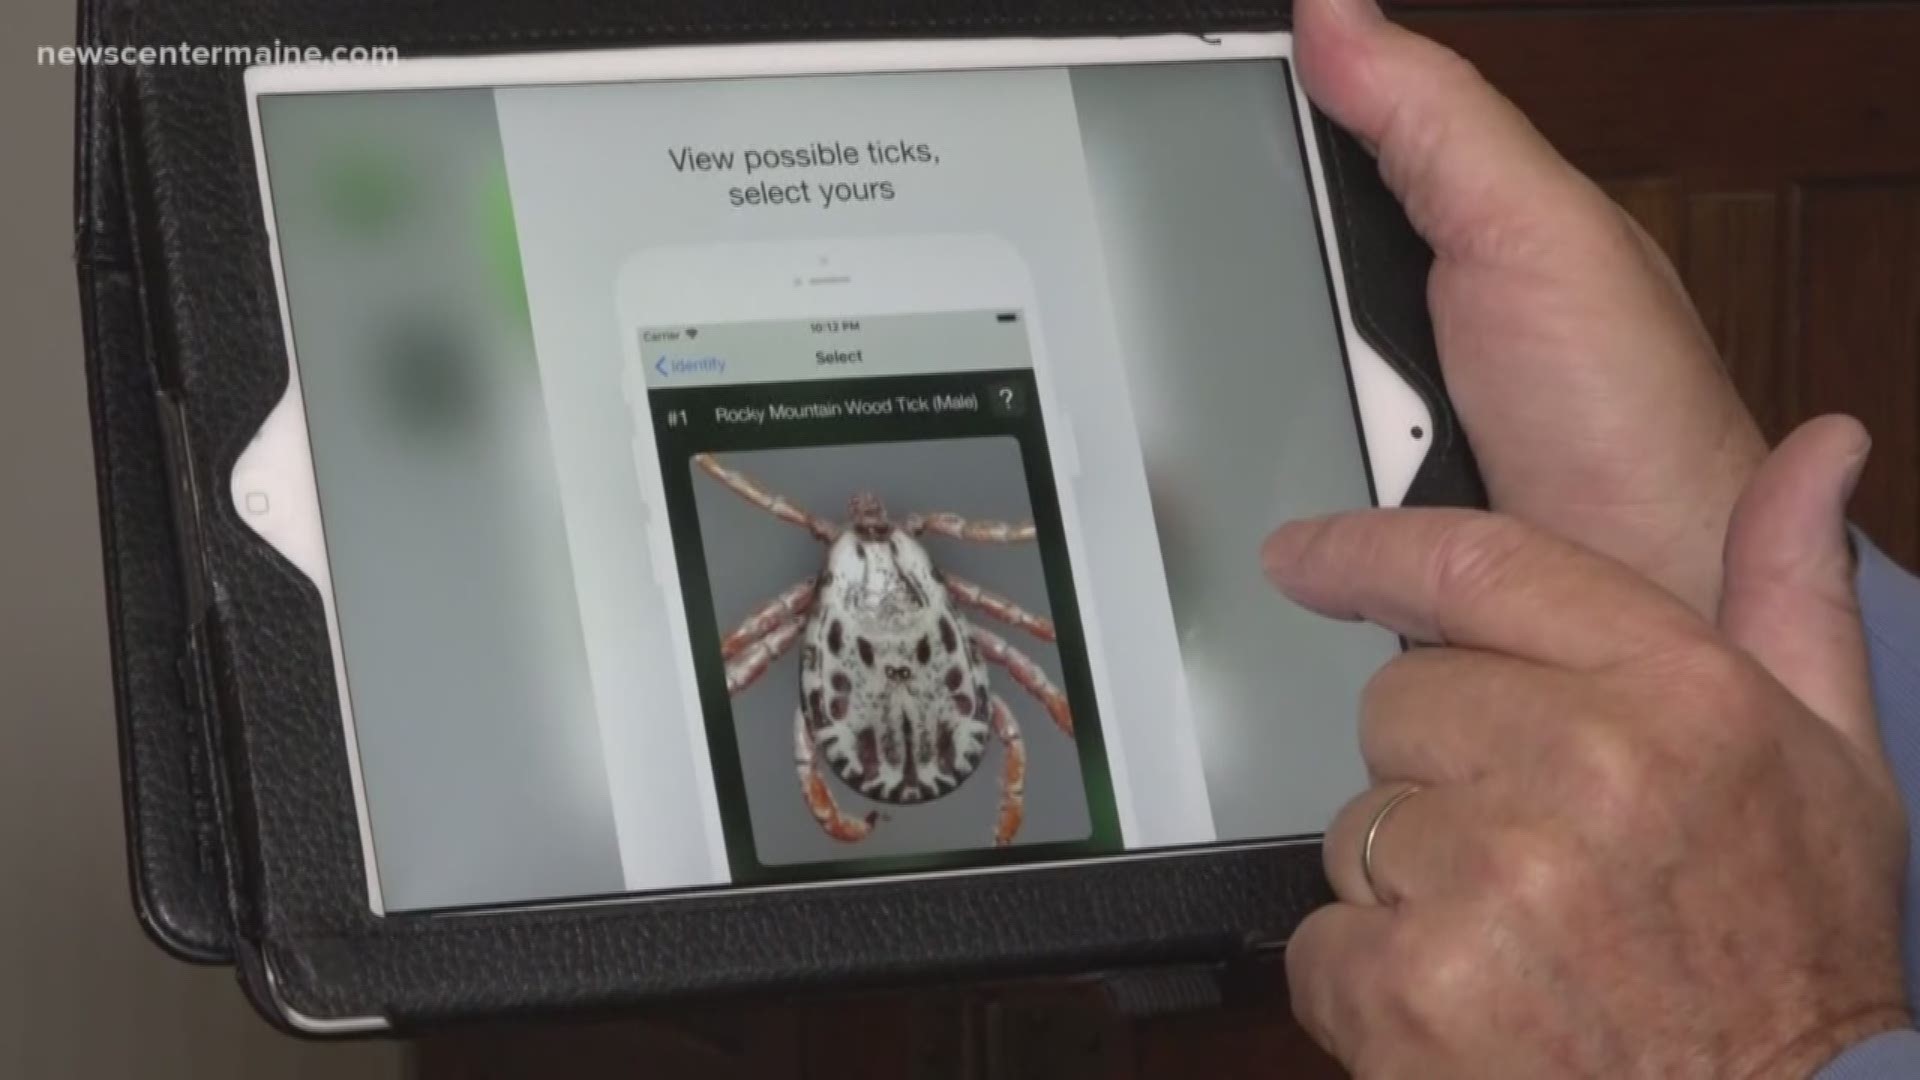 Hannah Dineen reports on a locally developed tick app